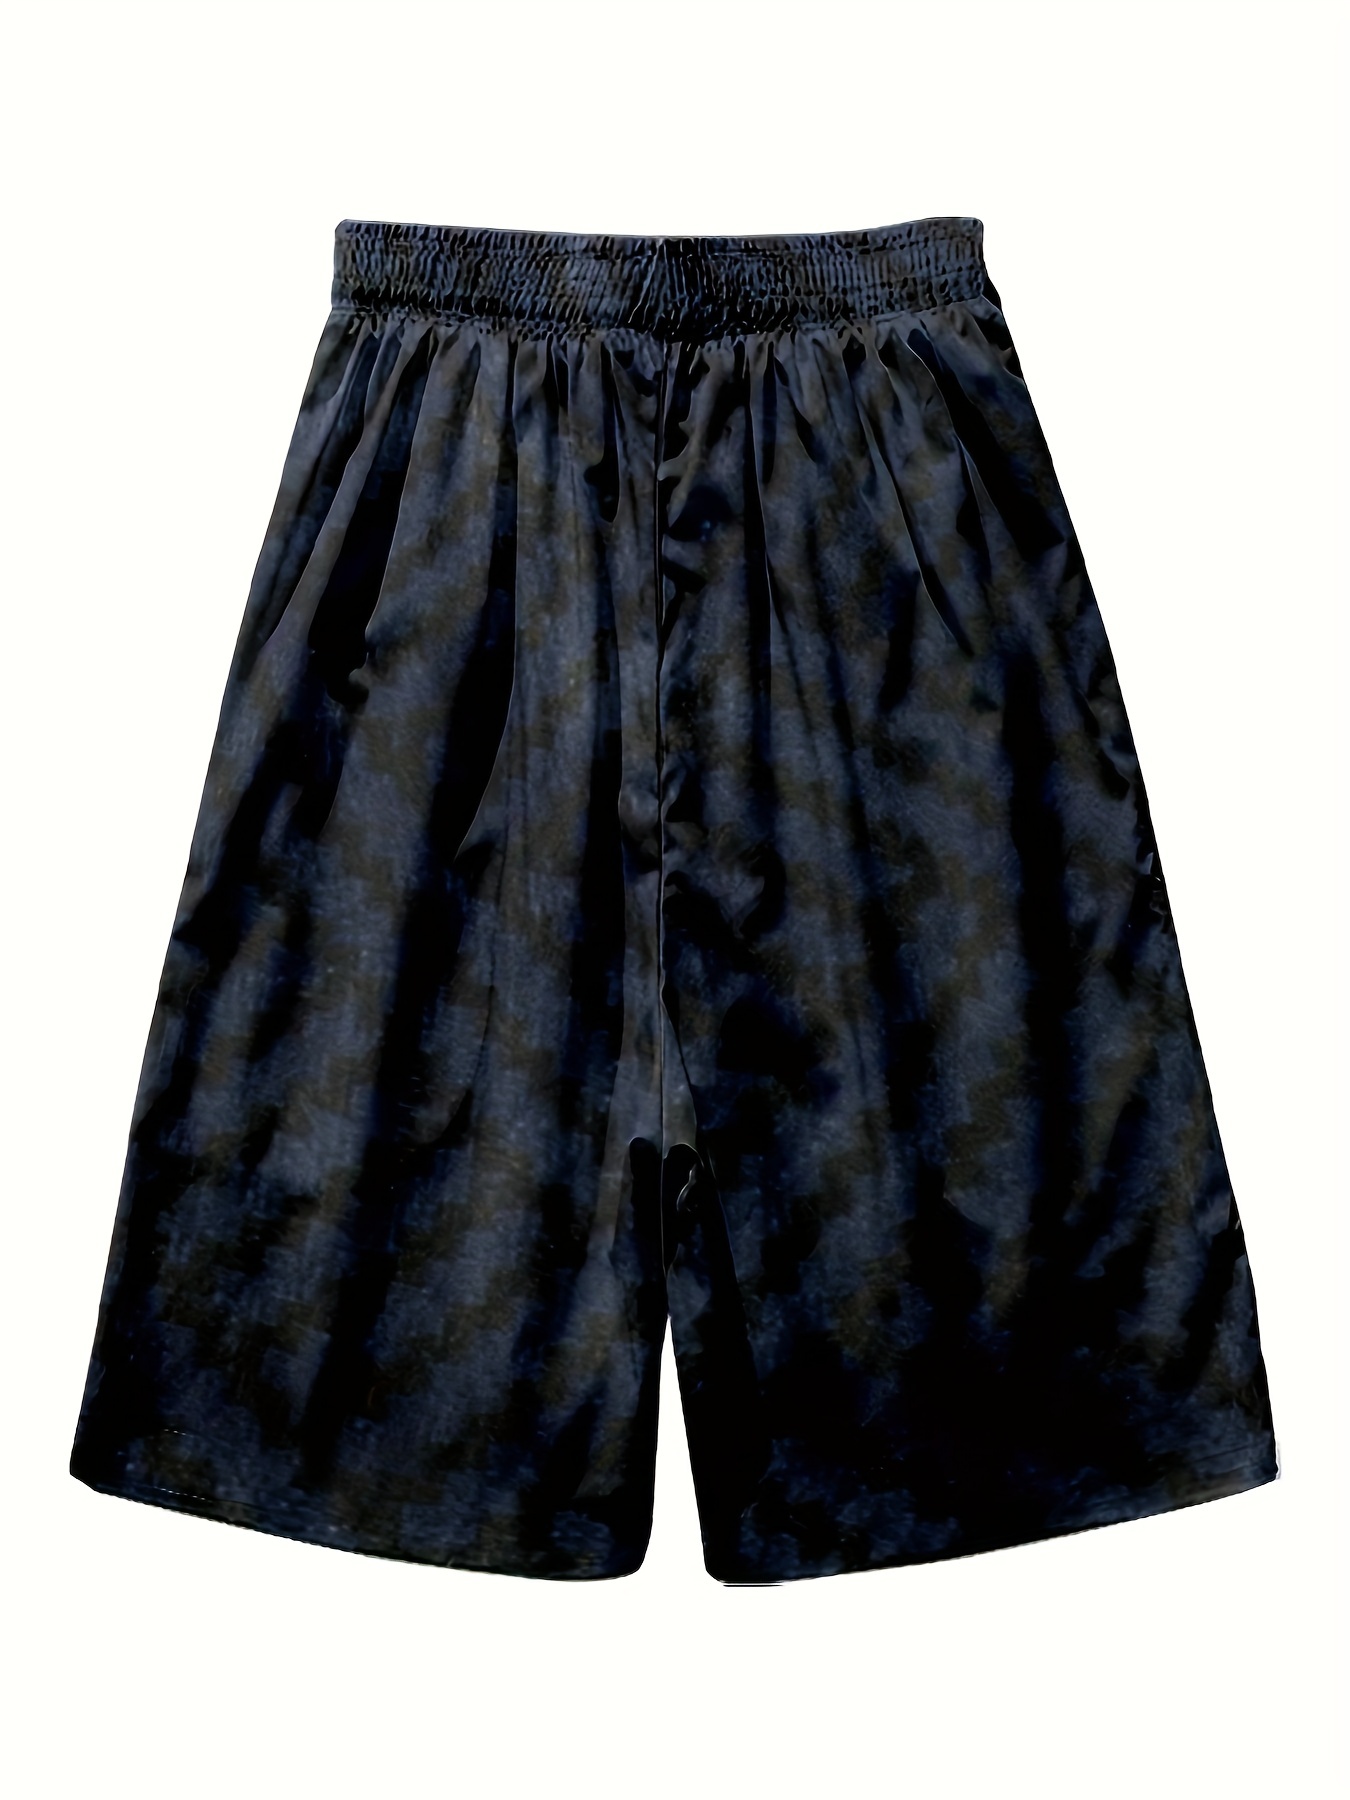 3 Drawstring Shorts Outfits for Guys